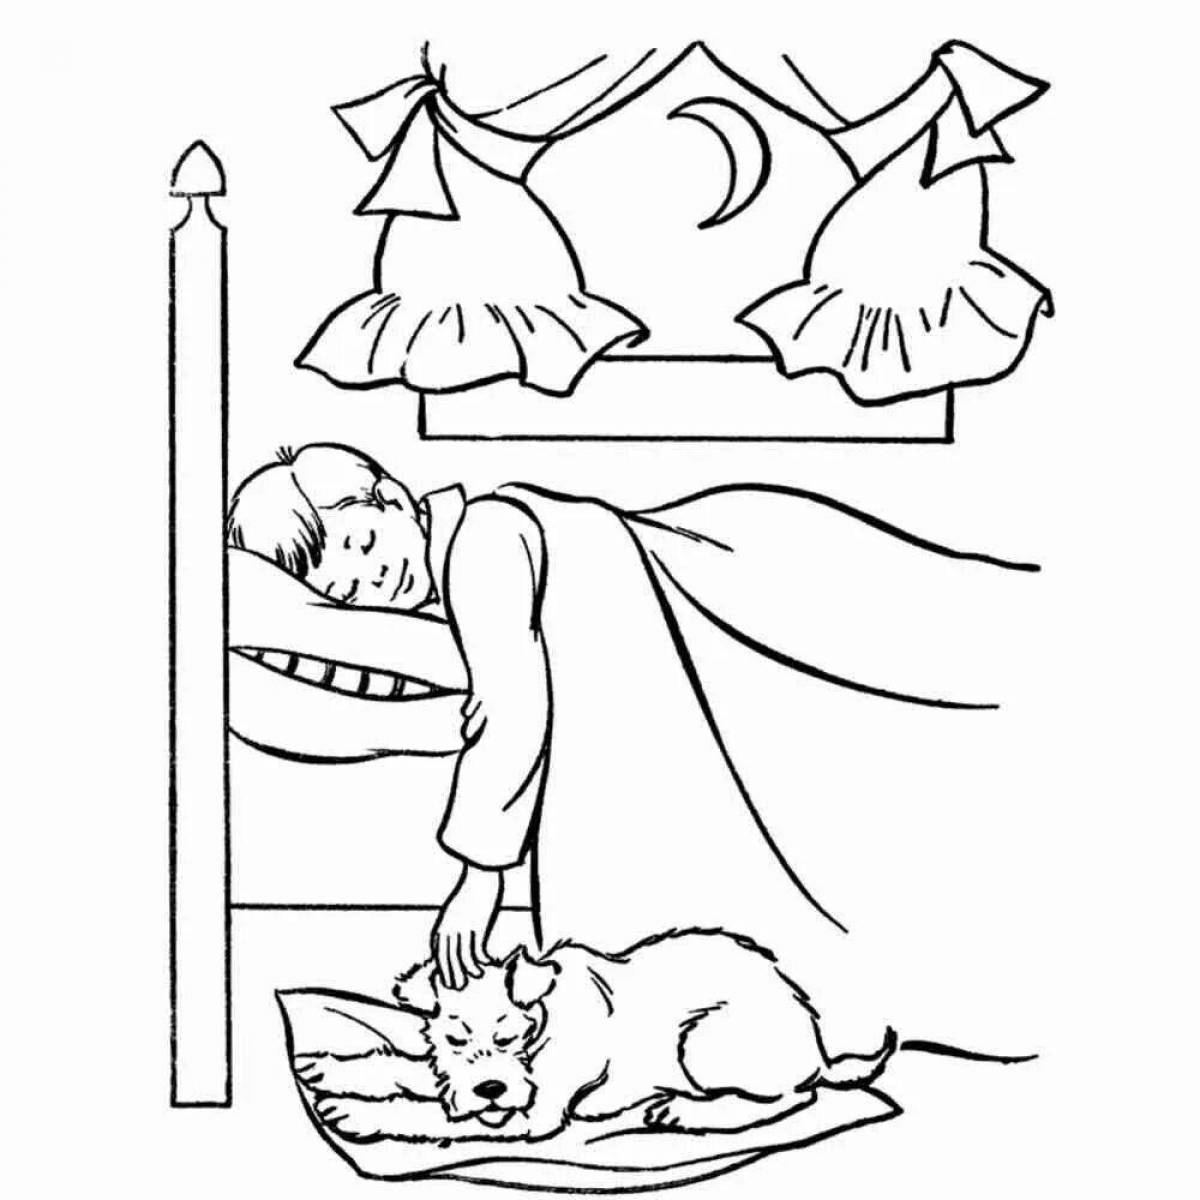 Colorful coloring page why dream